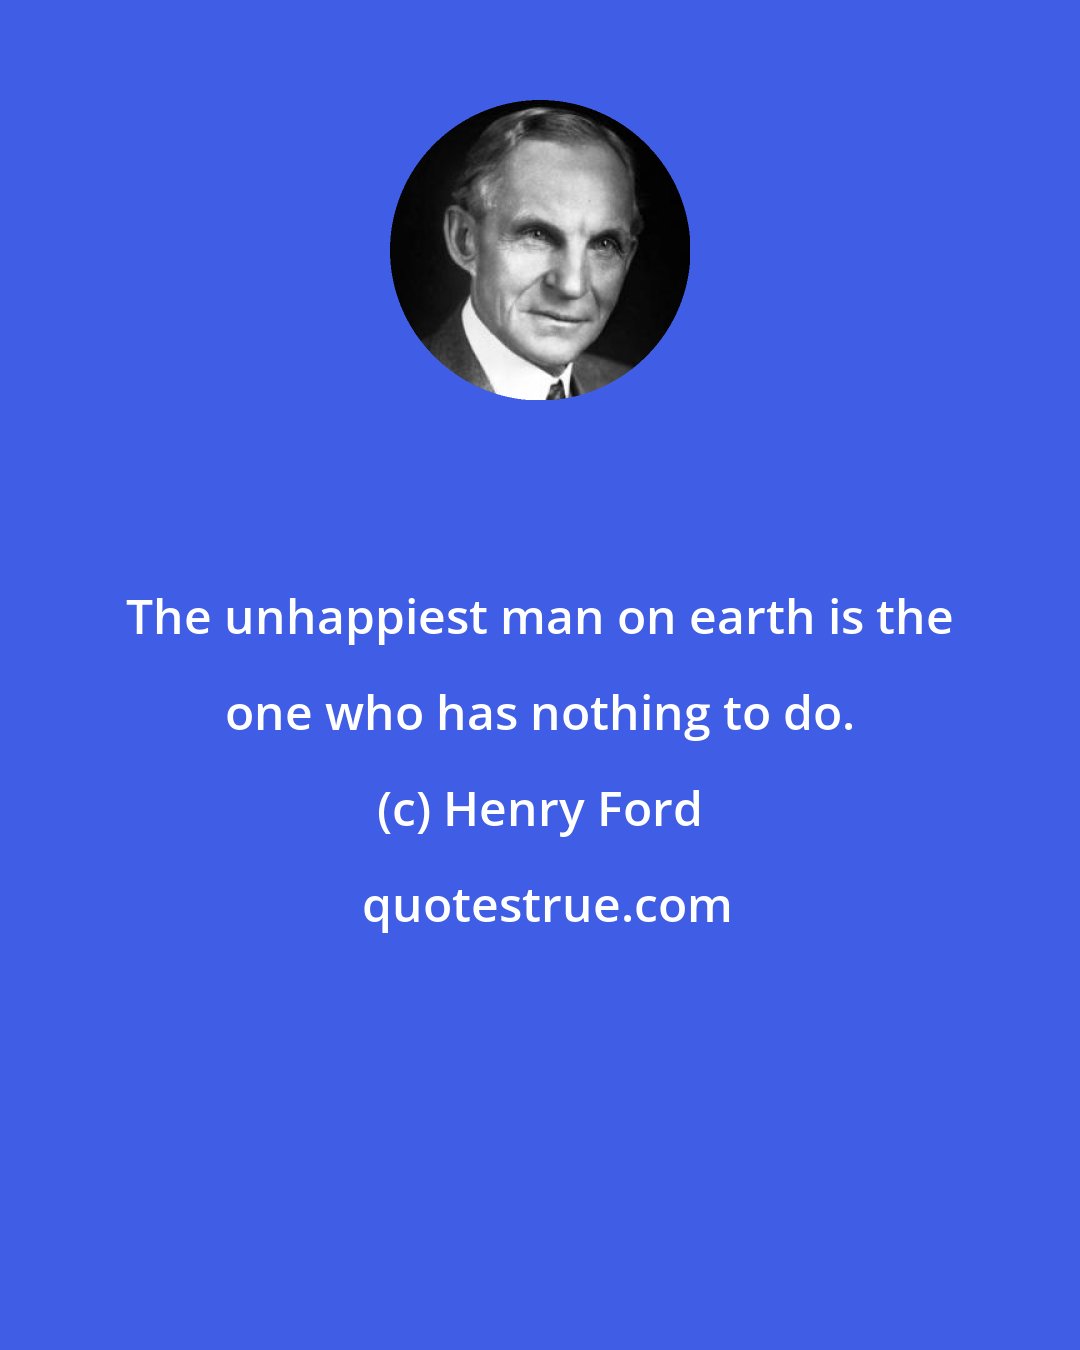 Henry Ford: The unhappiest man on earth is the one who has nothing to do.